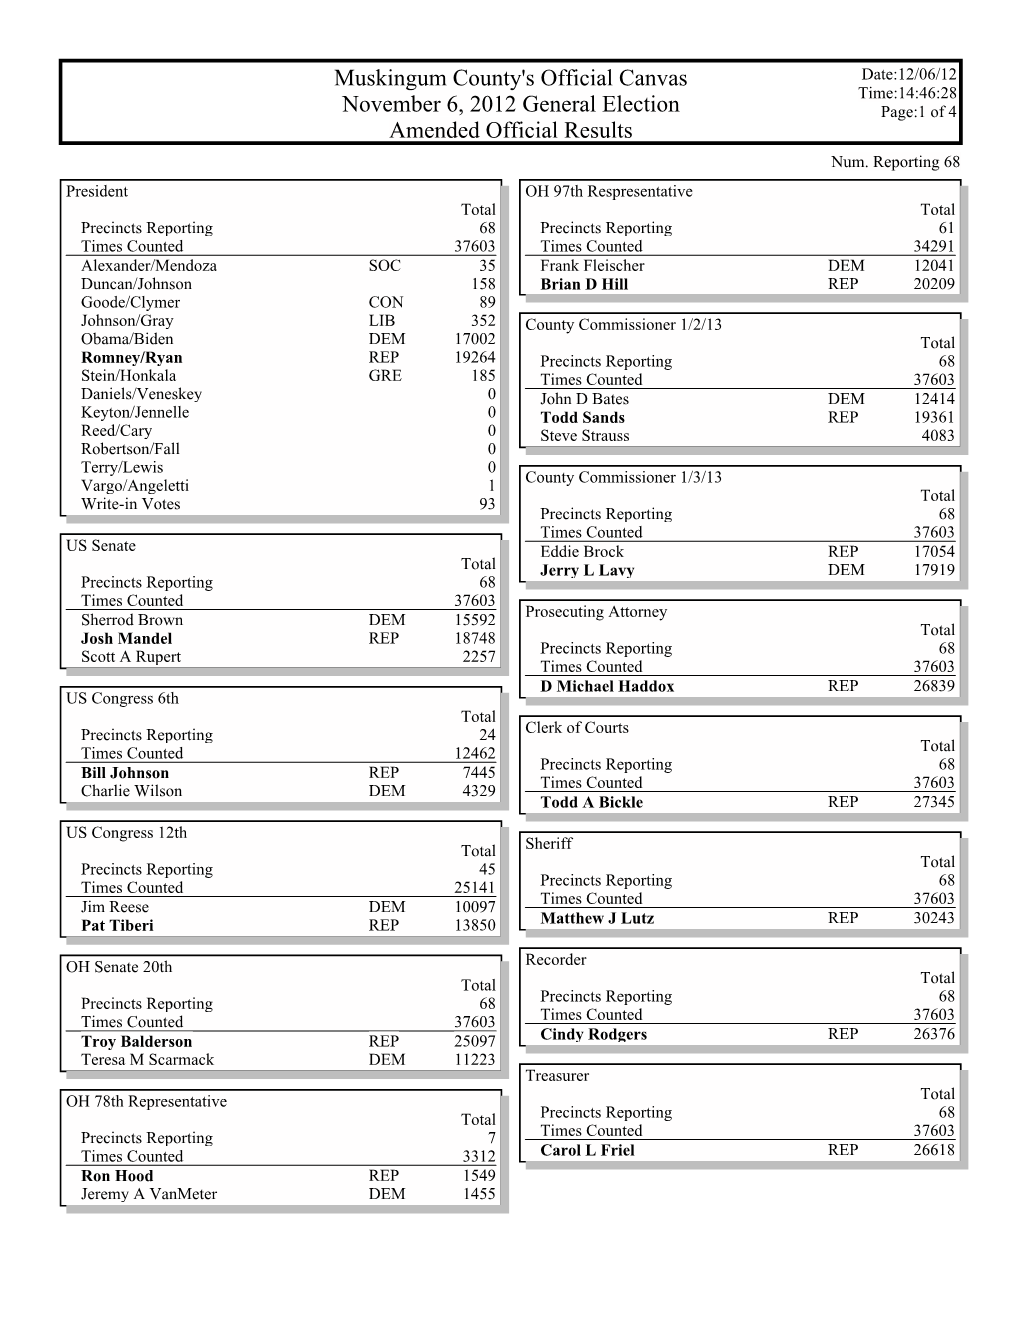 Muskingum County's Official Canvas November 6, 2012 General Election Amended Official Results